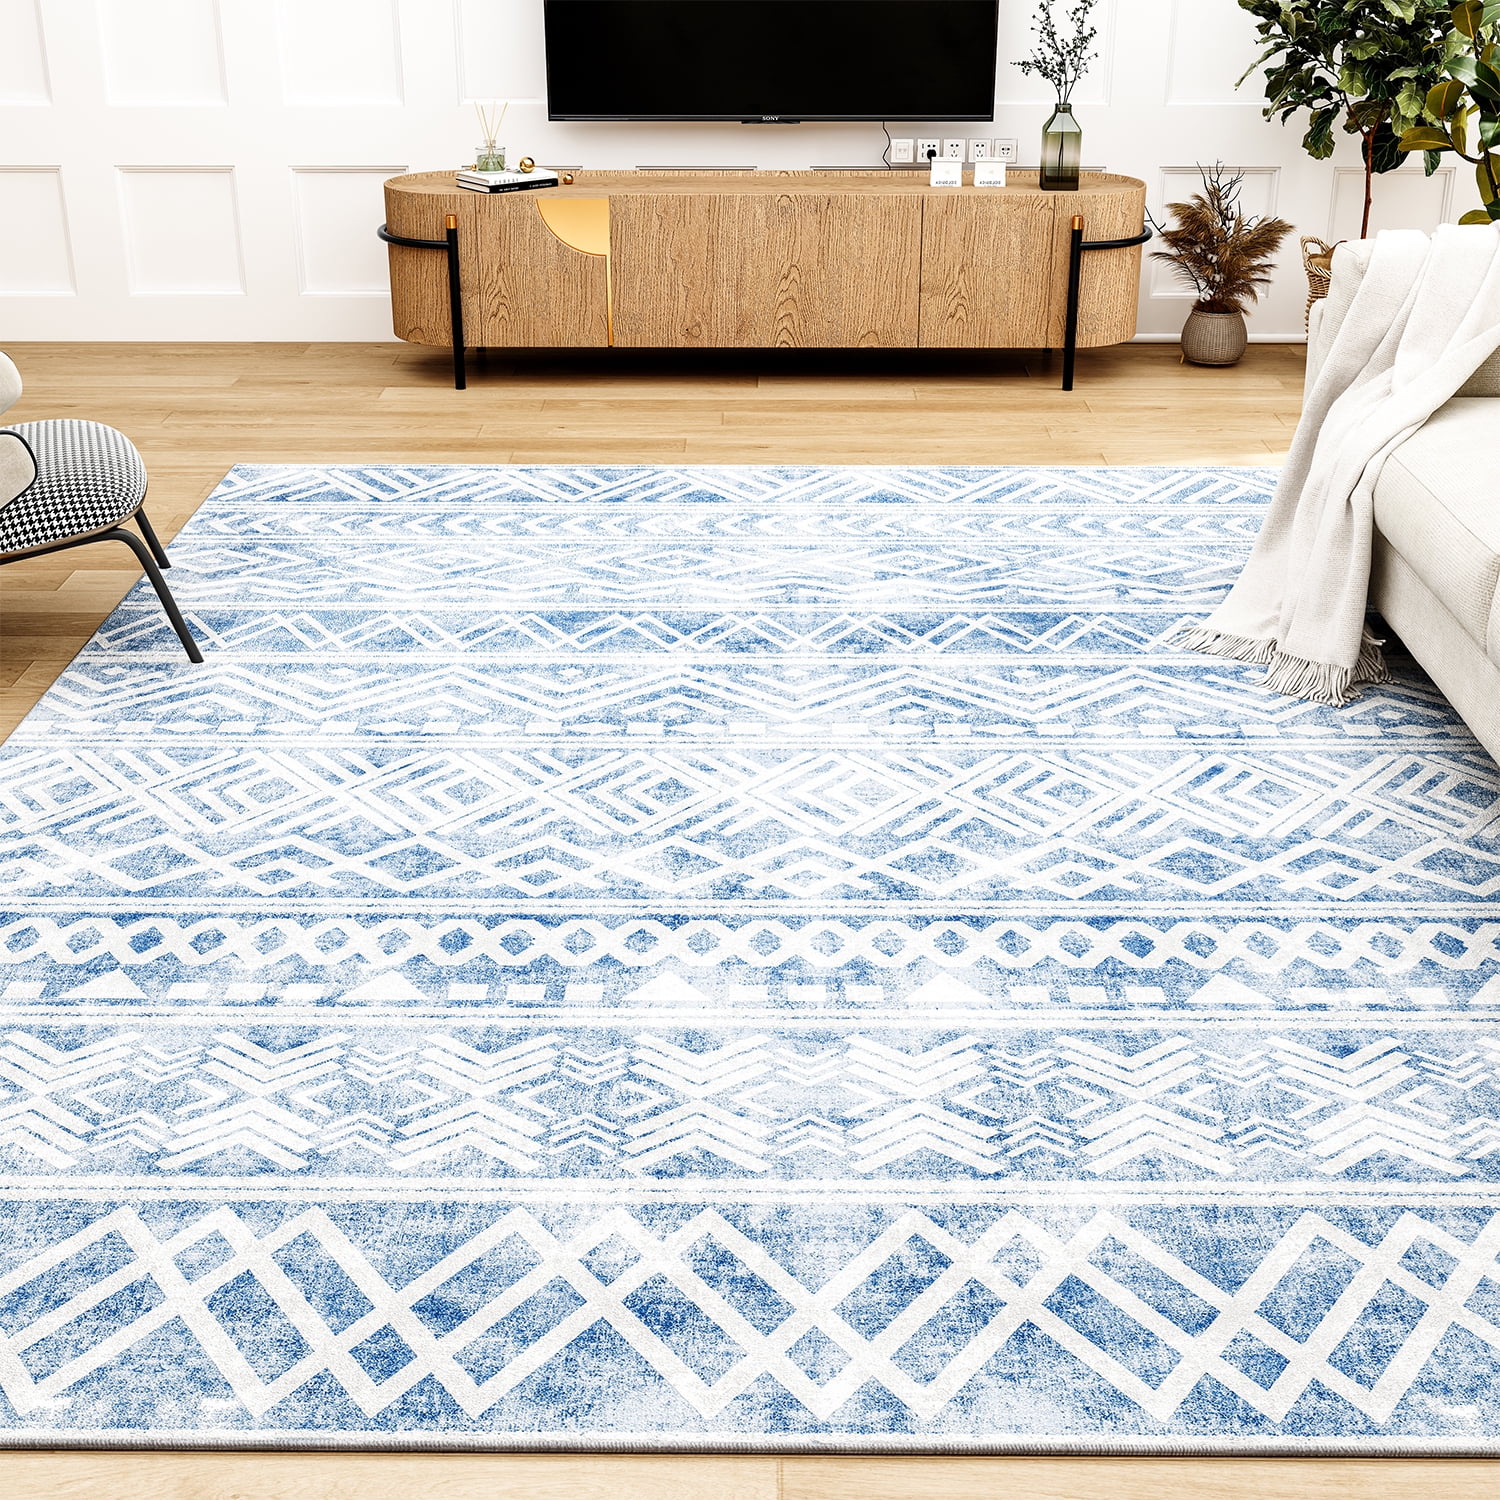 Lahome Boho Washable Carpet for Living Room - 3x5 Non-Slip Lightweight Thin  Kitchen Rugs Throw Low-Pile Small Area Rug for Bedroom, Blue Medallion